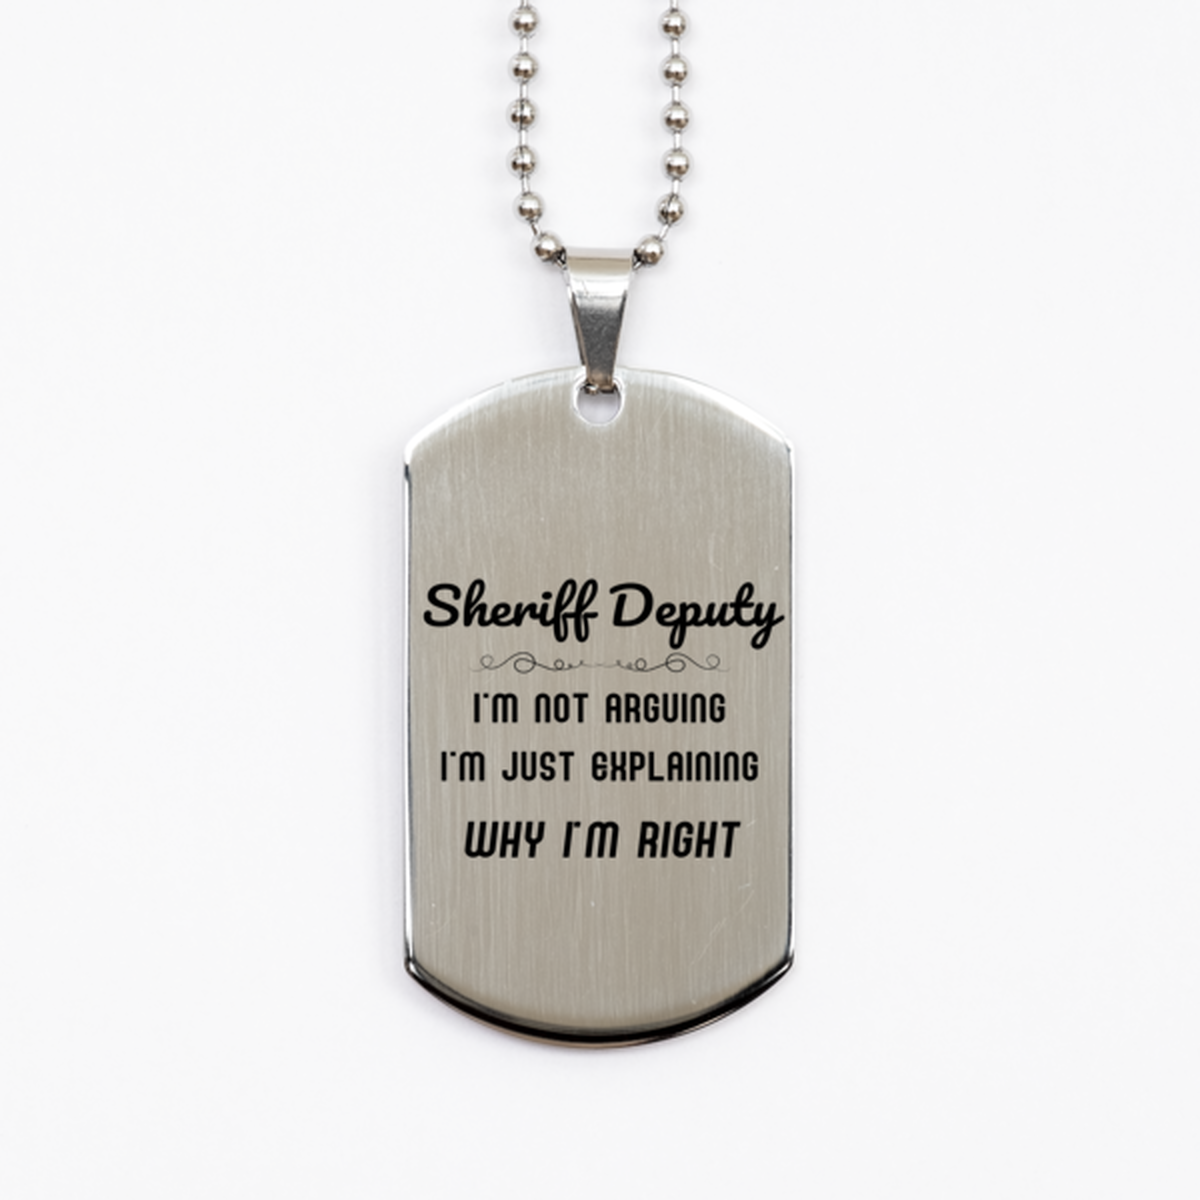 Sheriff Deputy I'm not Arguing. I'm Just Explaining Why I'm RIGHT Silver Dog Tag, Funny Saying Quote Sheriff Deputy Gifts For Sheriff Deputy Graduation Birthday Christmas Gifts for Men Women Coworker